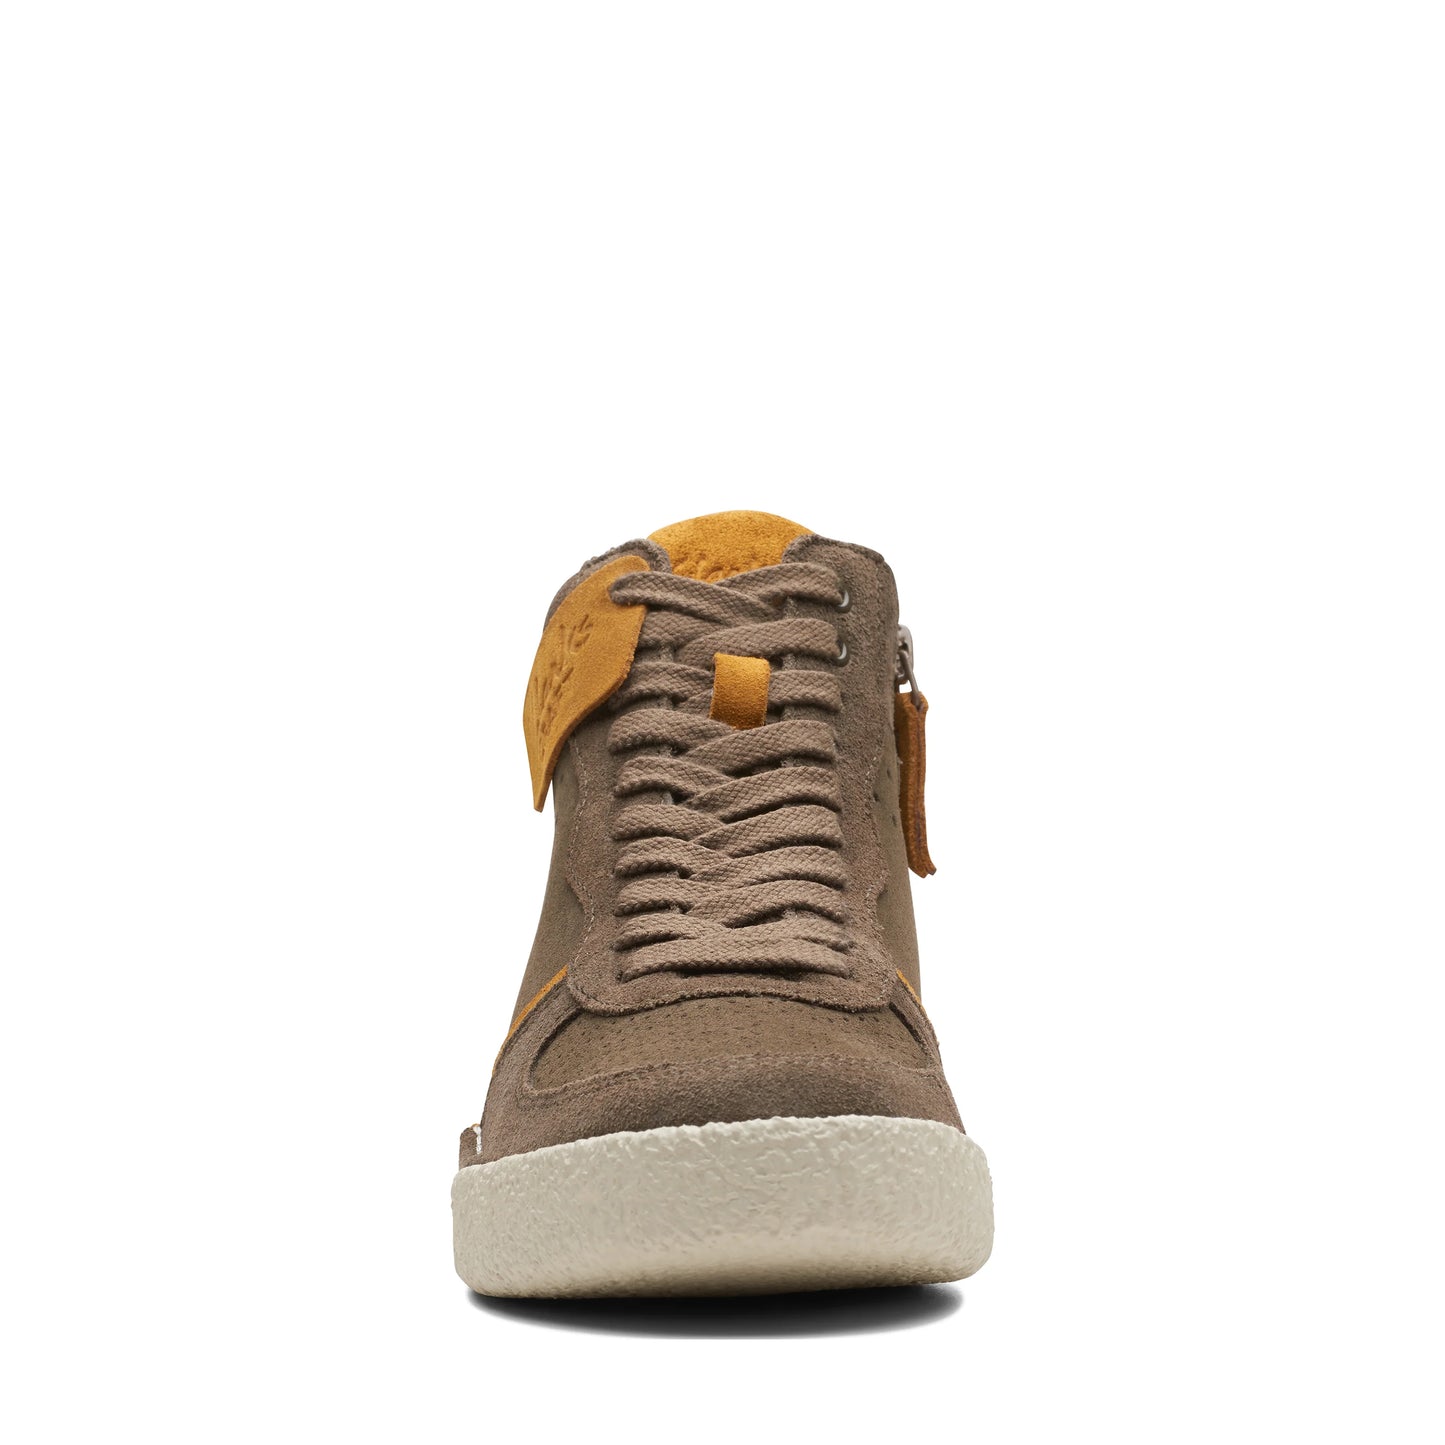 CLARKS | 女子靴子 | CRAFTCUP MID OLIVE COMBI | 绿色的